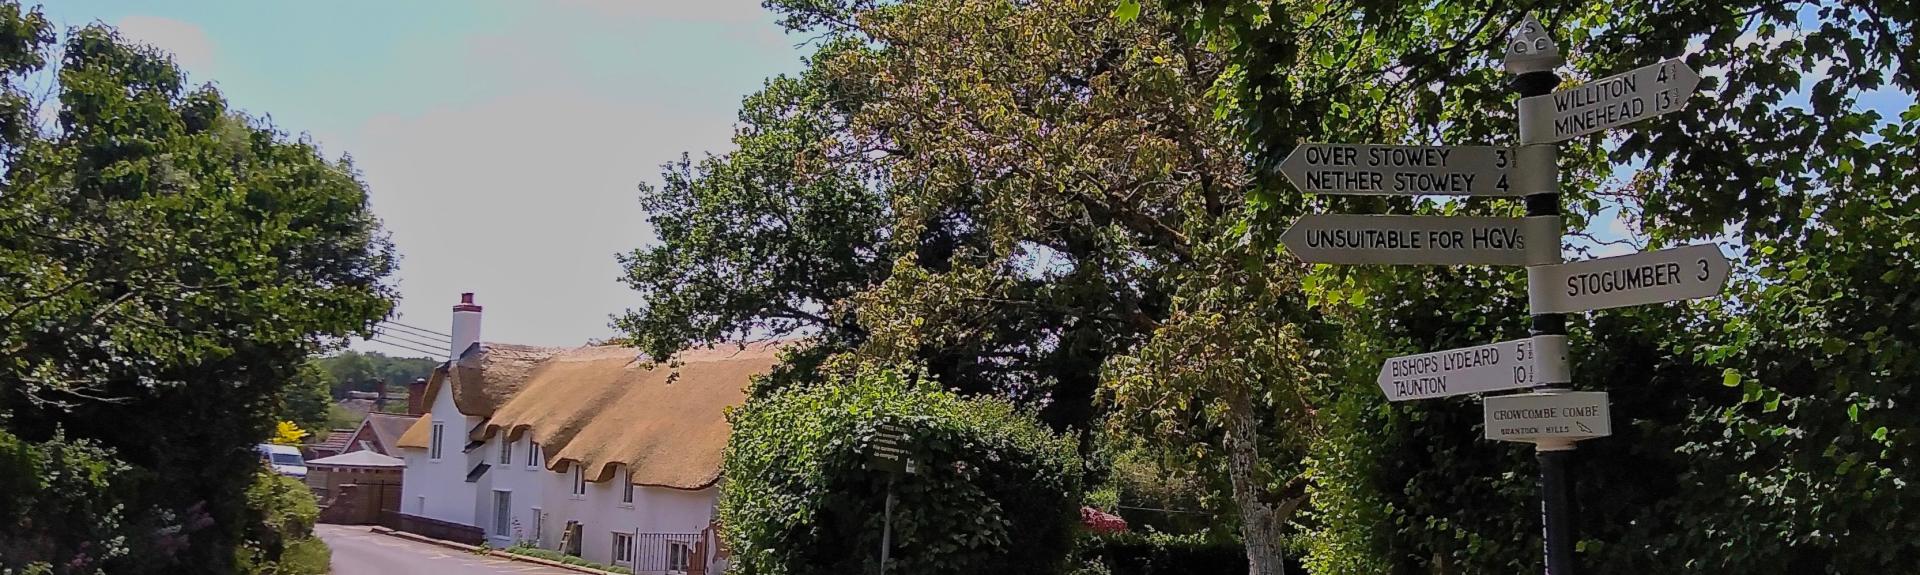 A quiet village lane lined by trees and a row of thatched cottages in The Quantock Hills